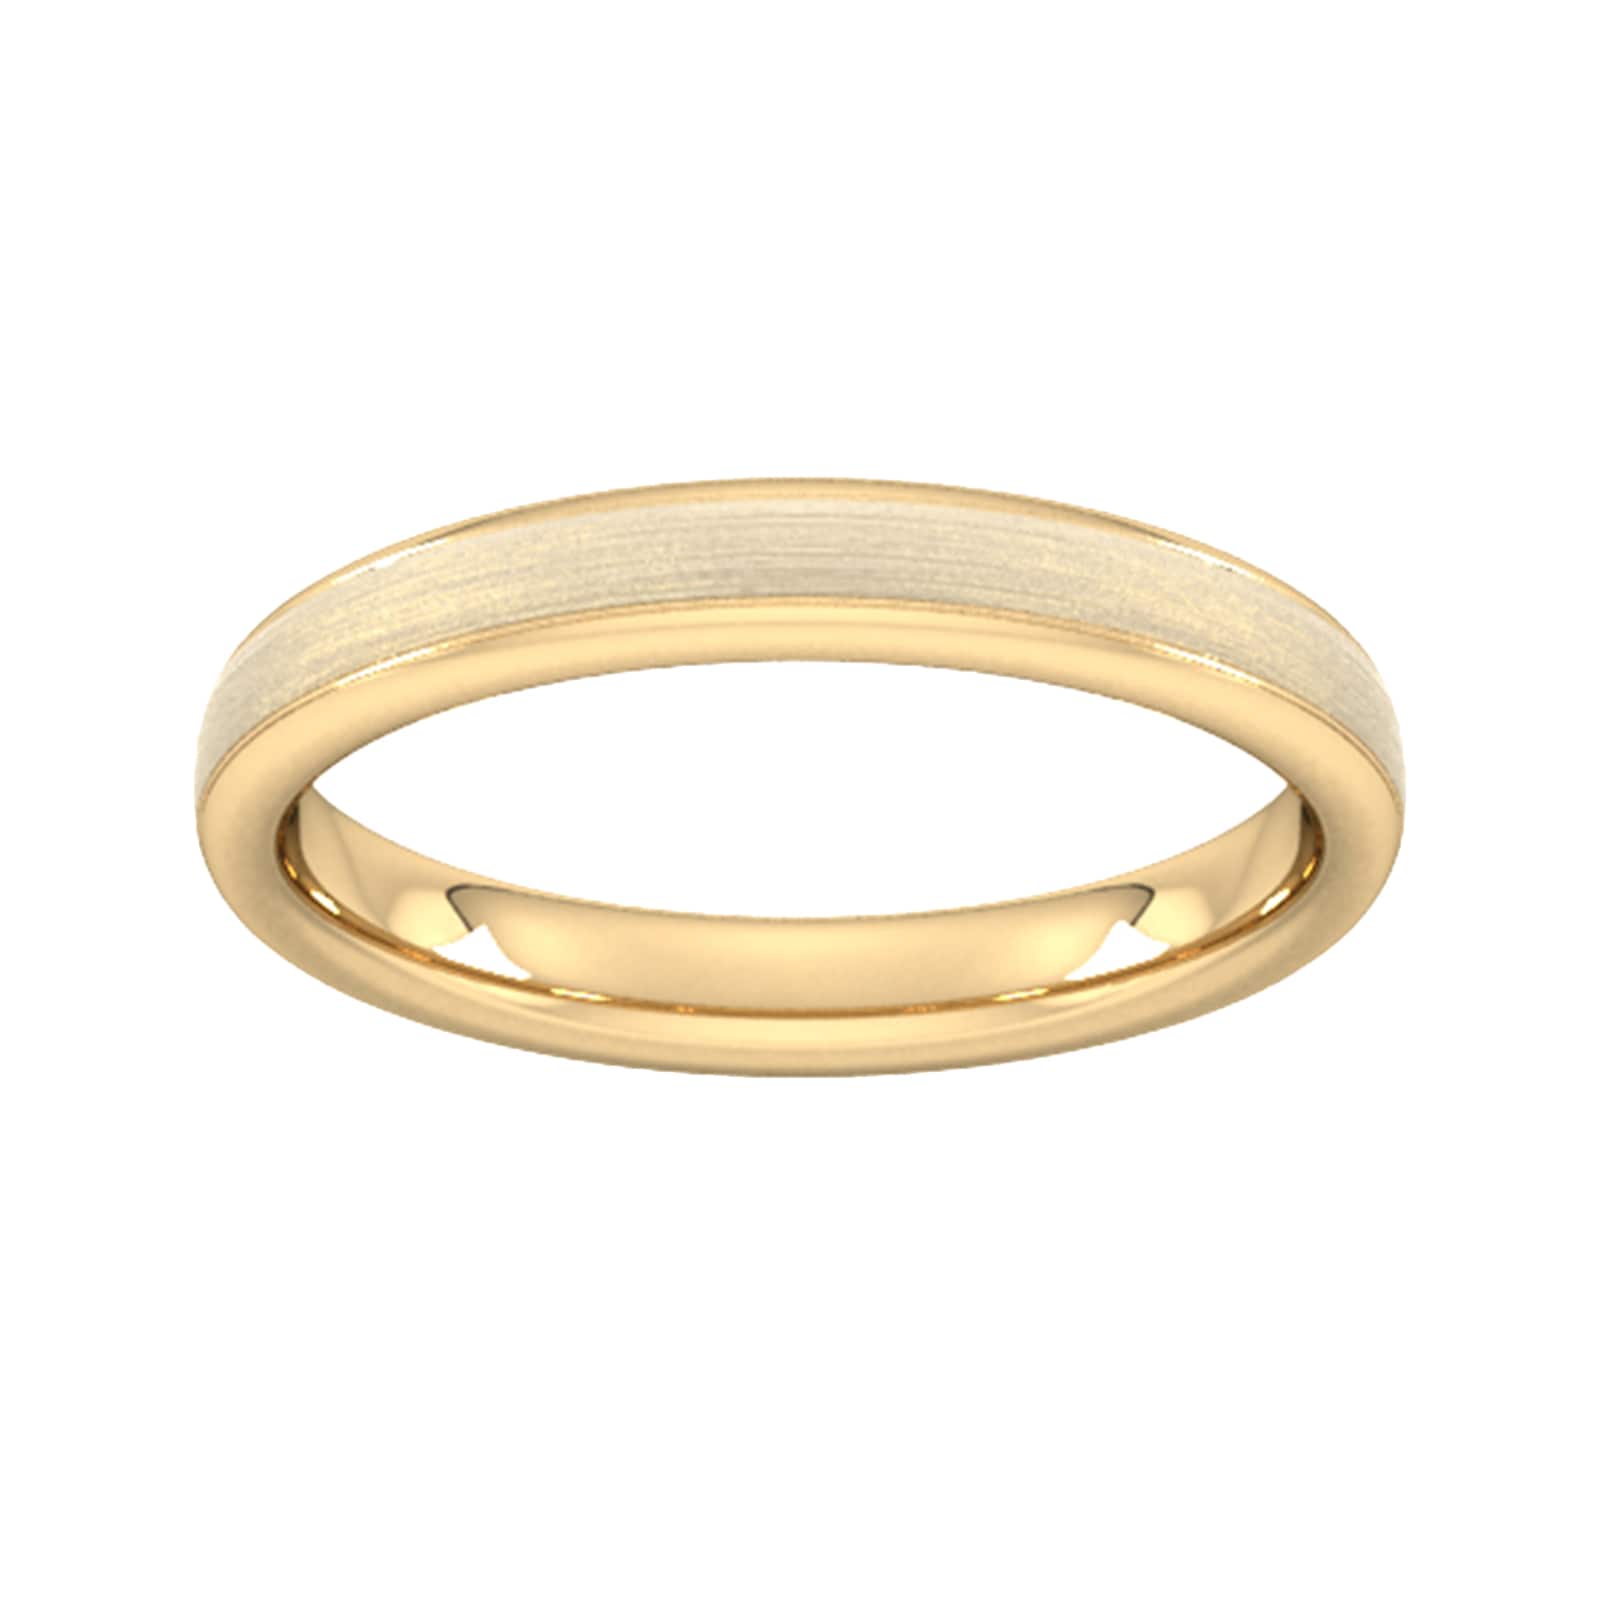 3mm Flat Court Heavy Matt Centre With Grooves Wedding Ring In 9 Carat Yellow Gold - Ring Size K